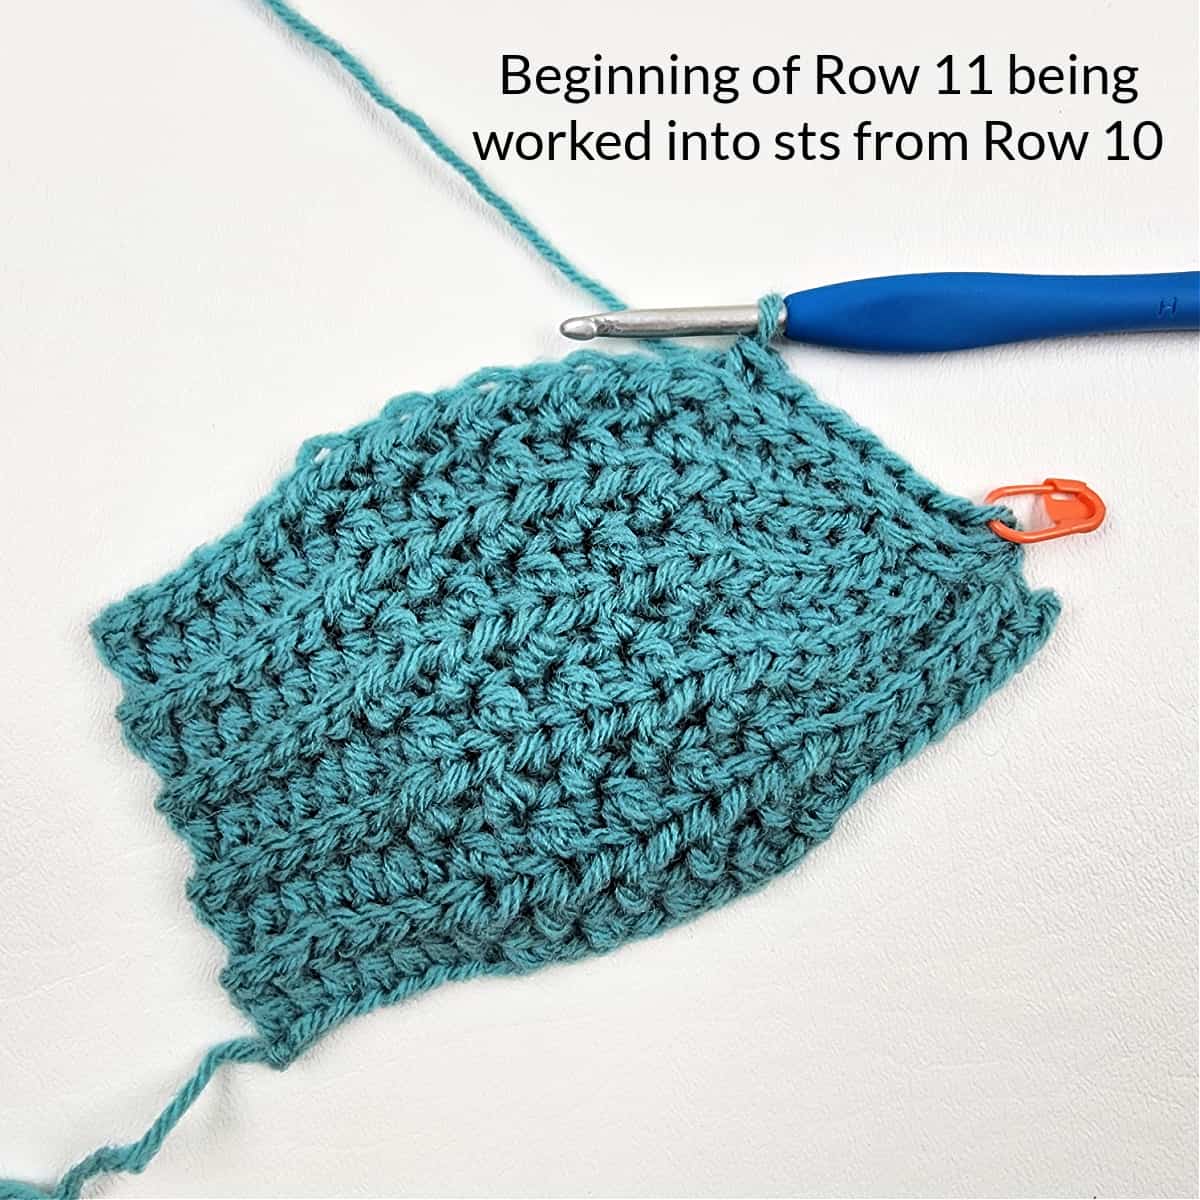 Begin the next crochet short row section on the green hat.